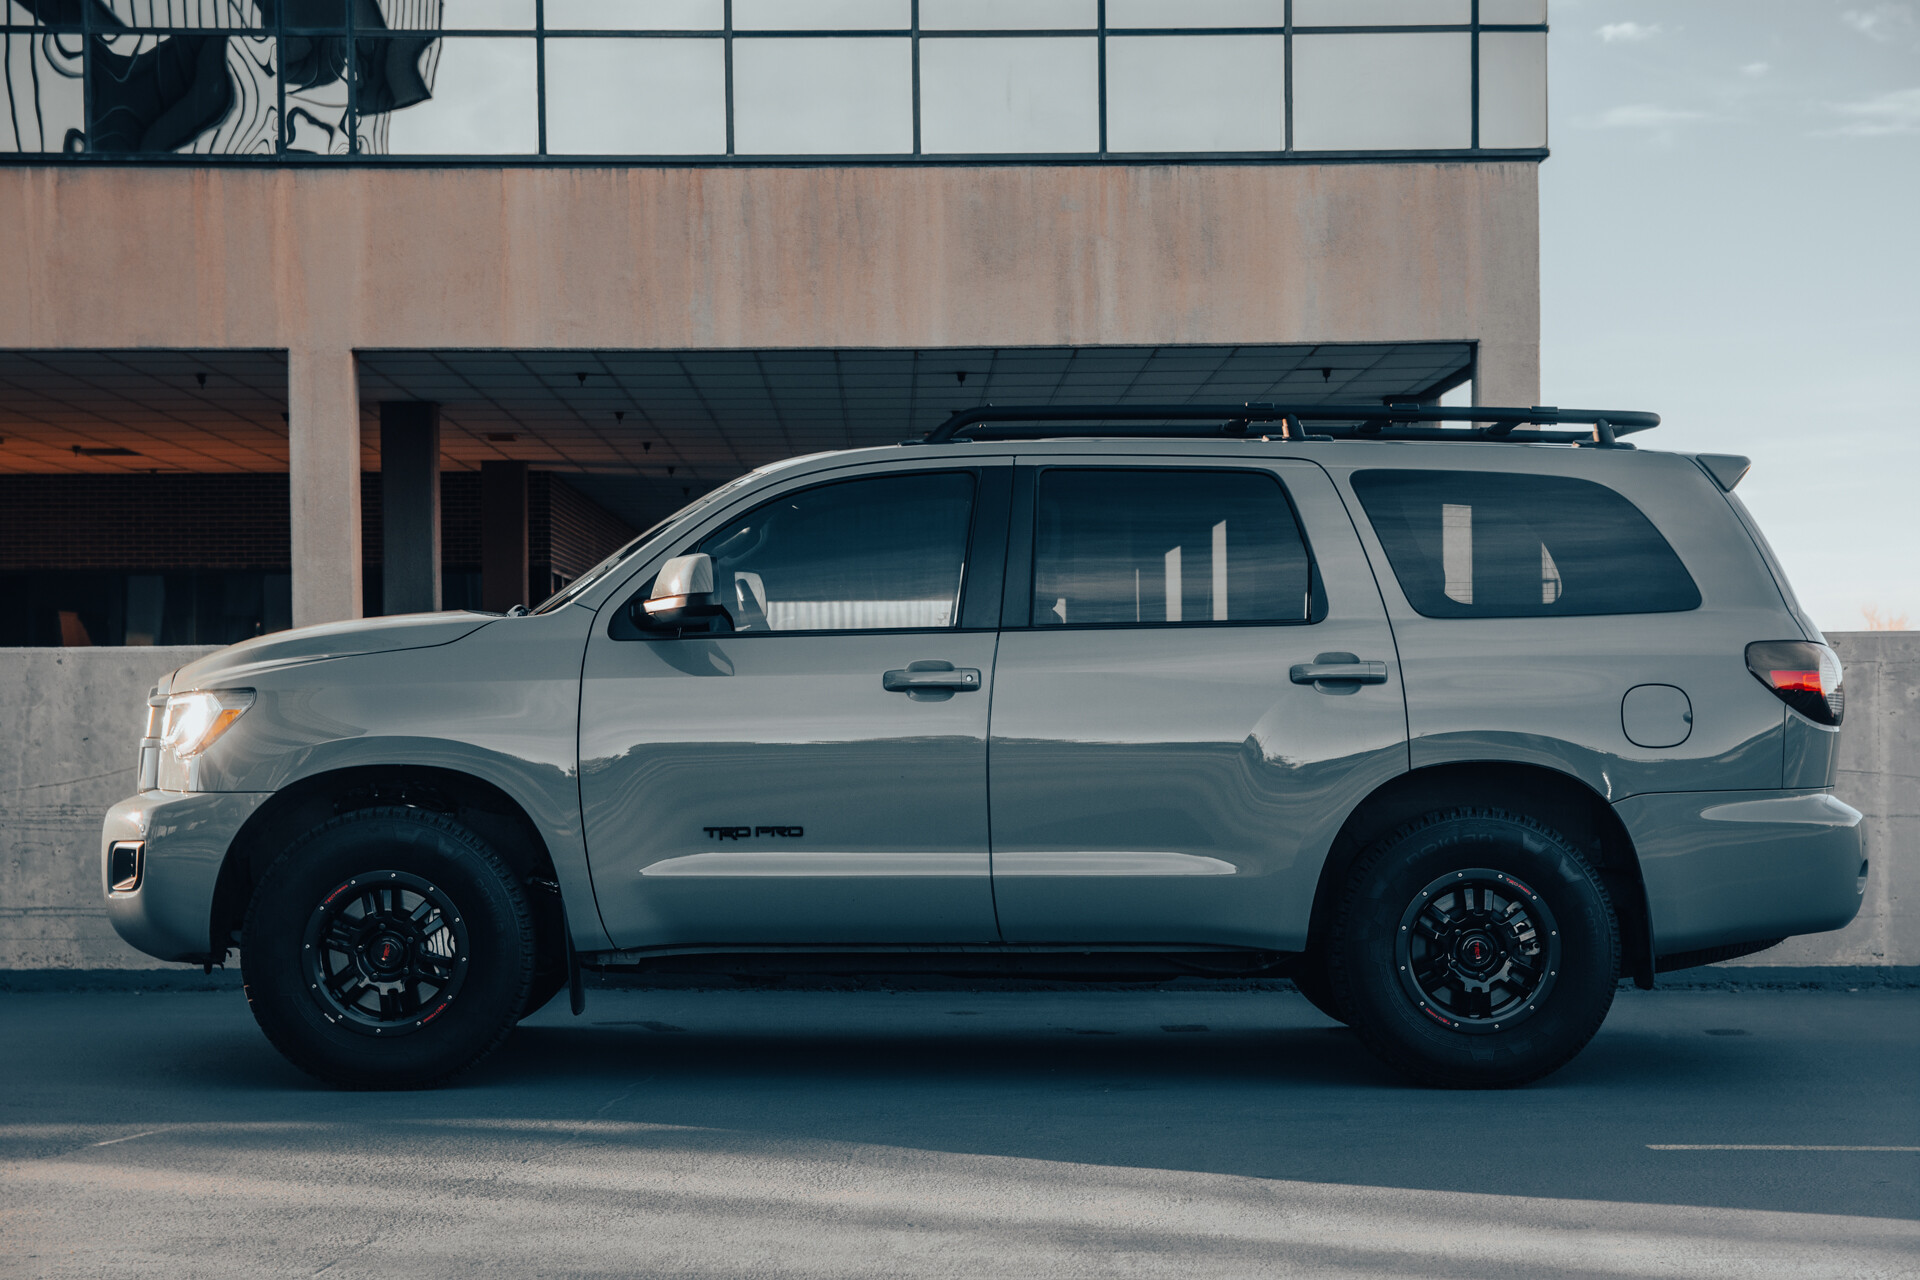 2021 Toyota Sequoia TRD Pro in Lunar Rock Driver’s Side View